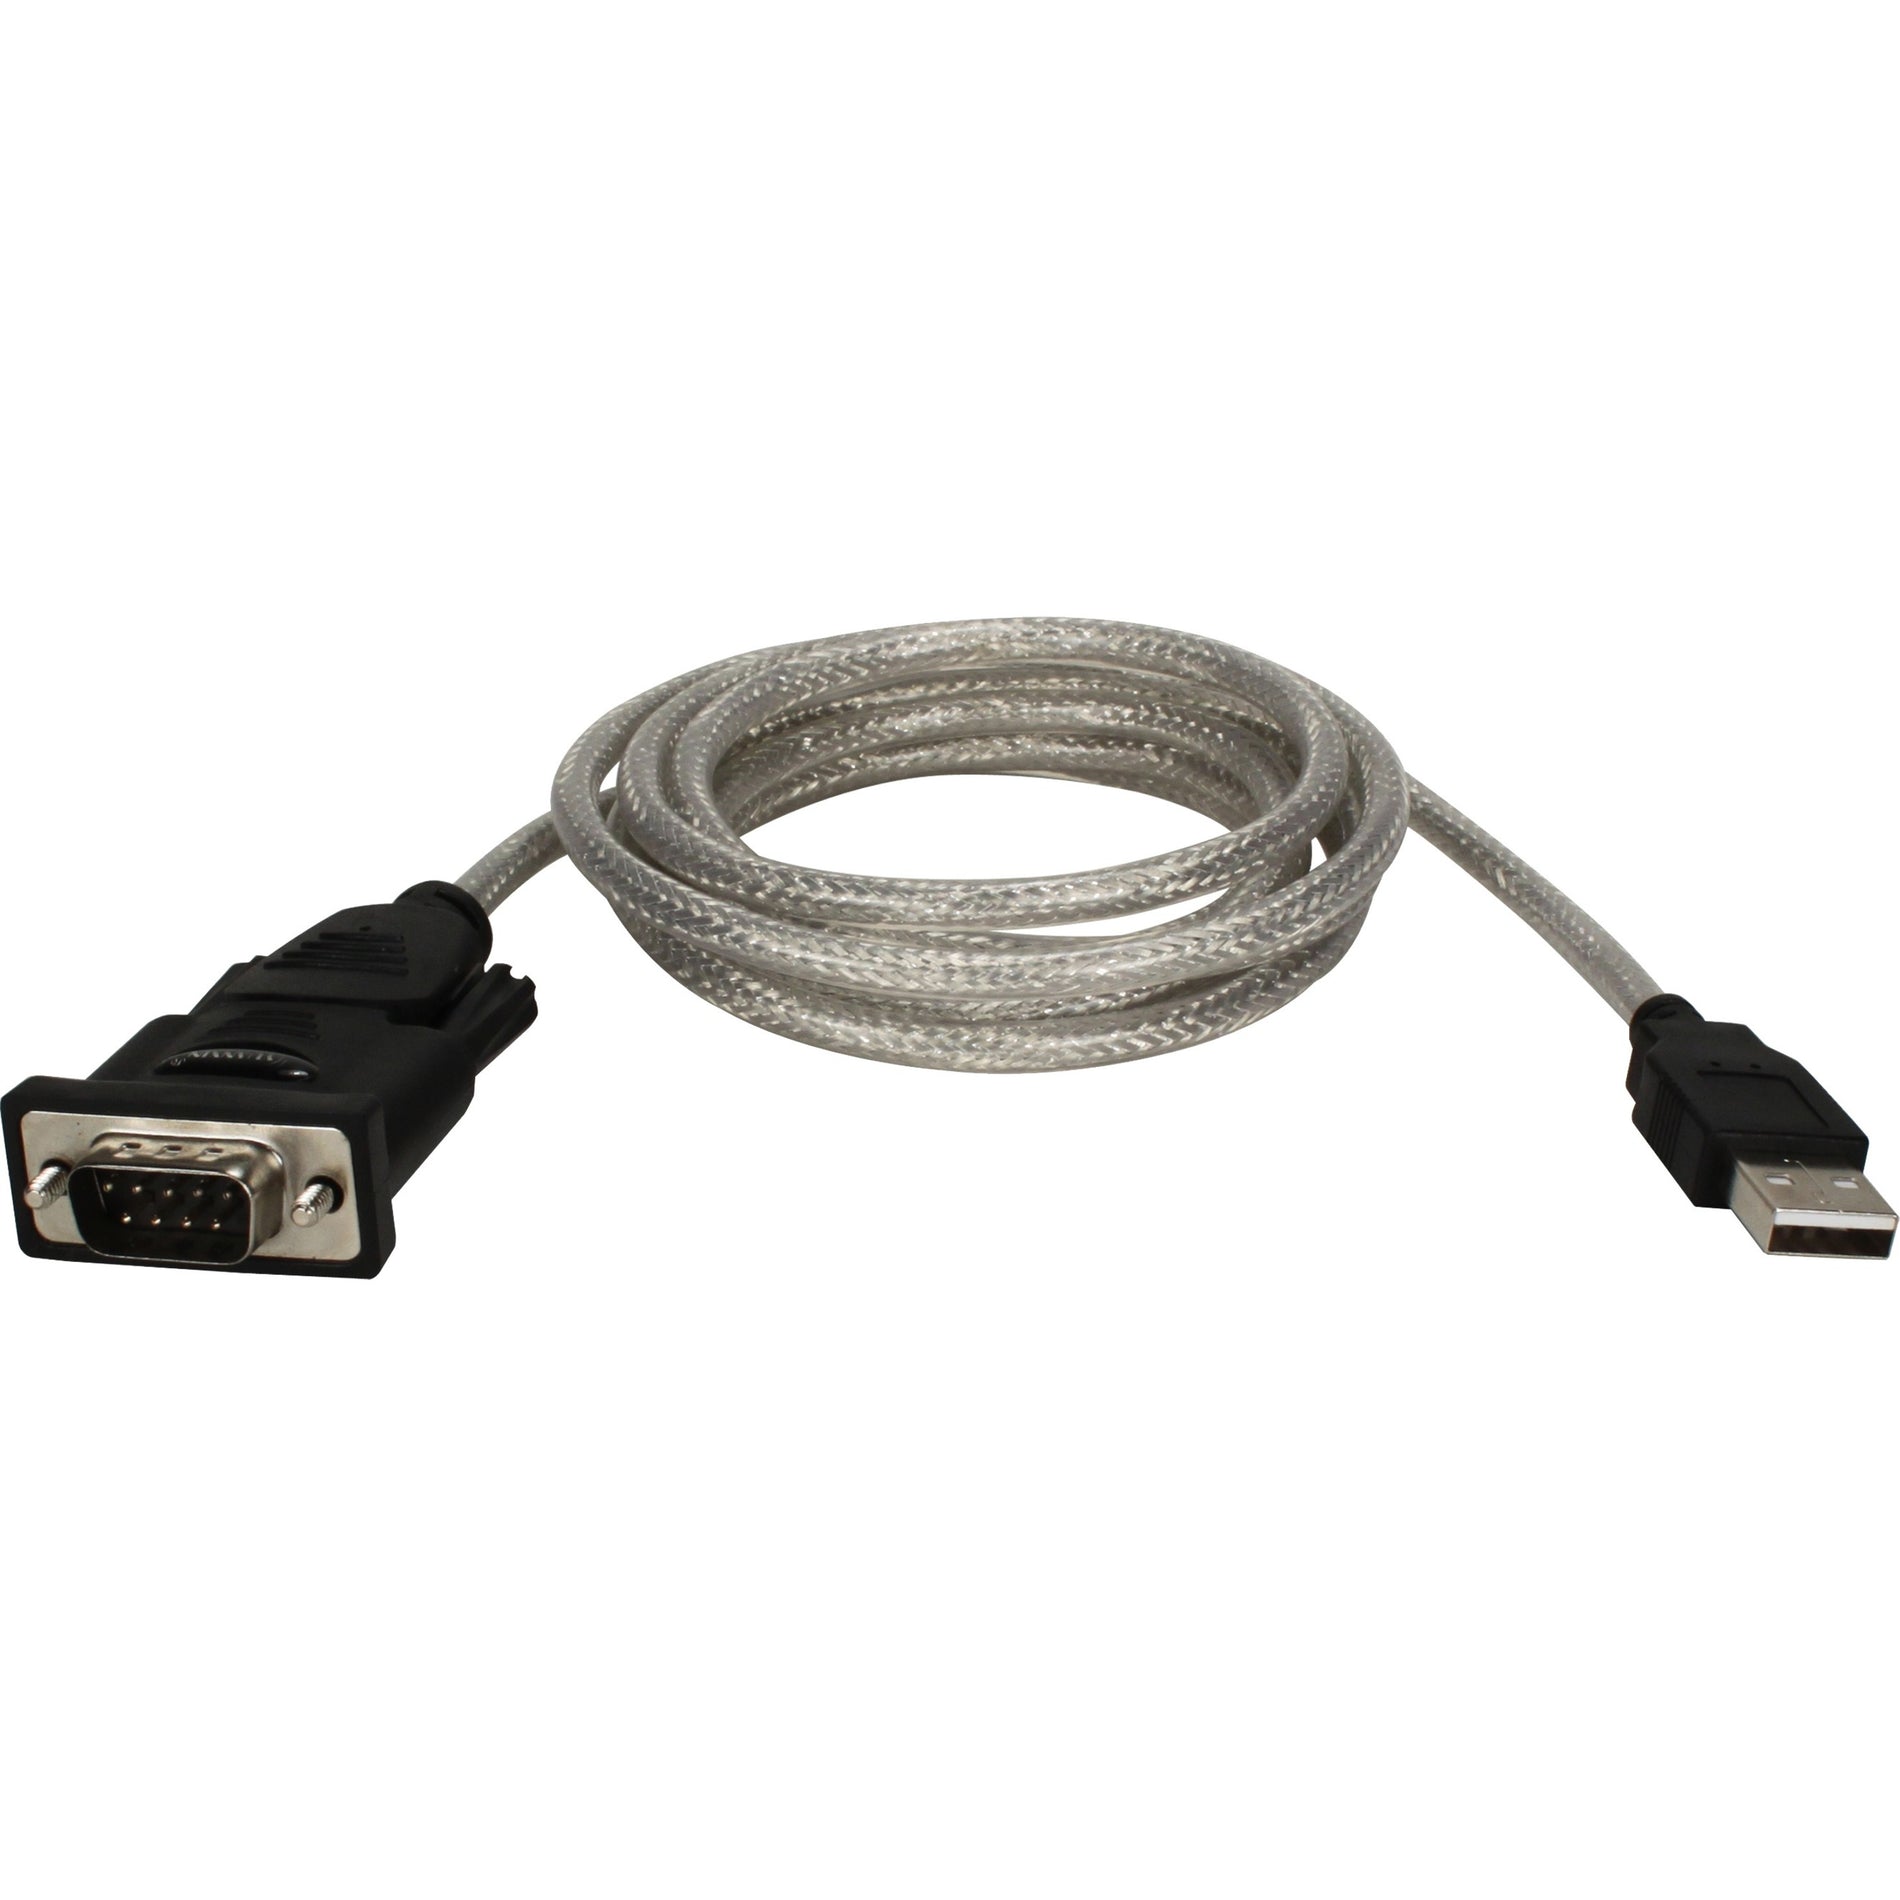 QVS UR2000M2 6ft USB to DB9 Male RS232 Serial Adaptor Cable, High-Speed Data Transfer